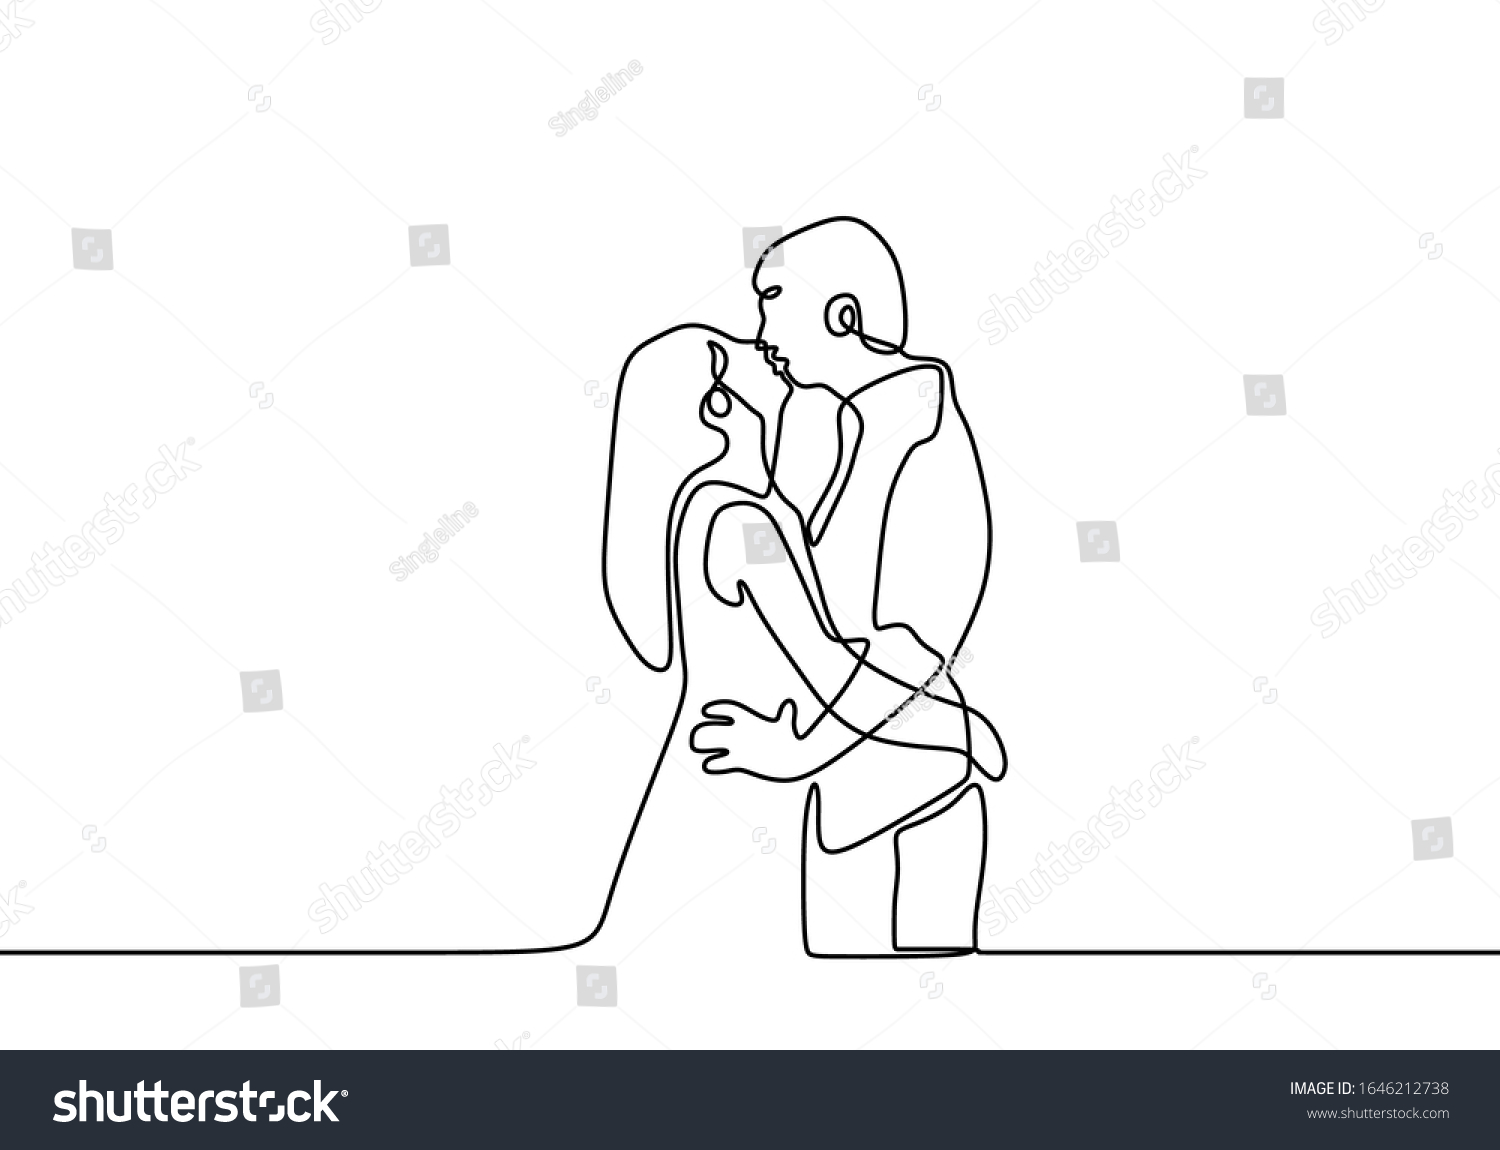 One Line Drawing Kissing Couple Love Stock Vector Royalty Free 1646212738 Shutterstock